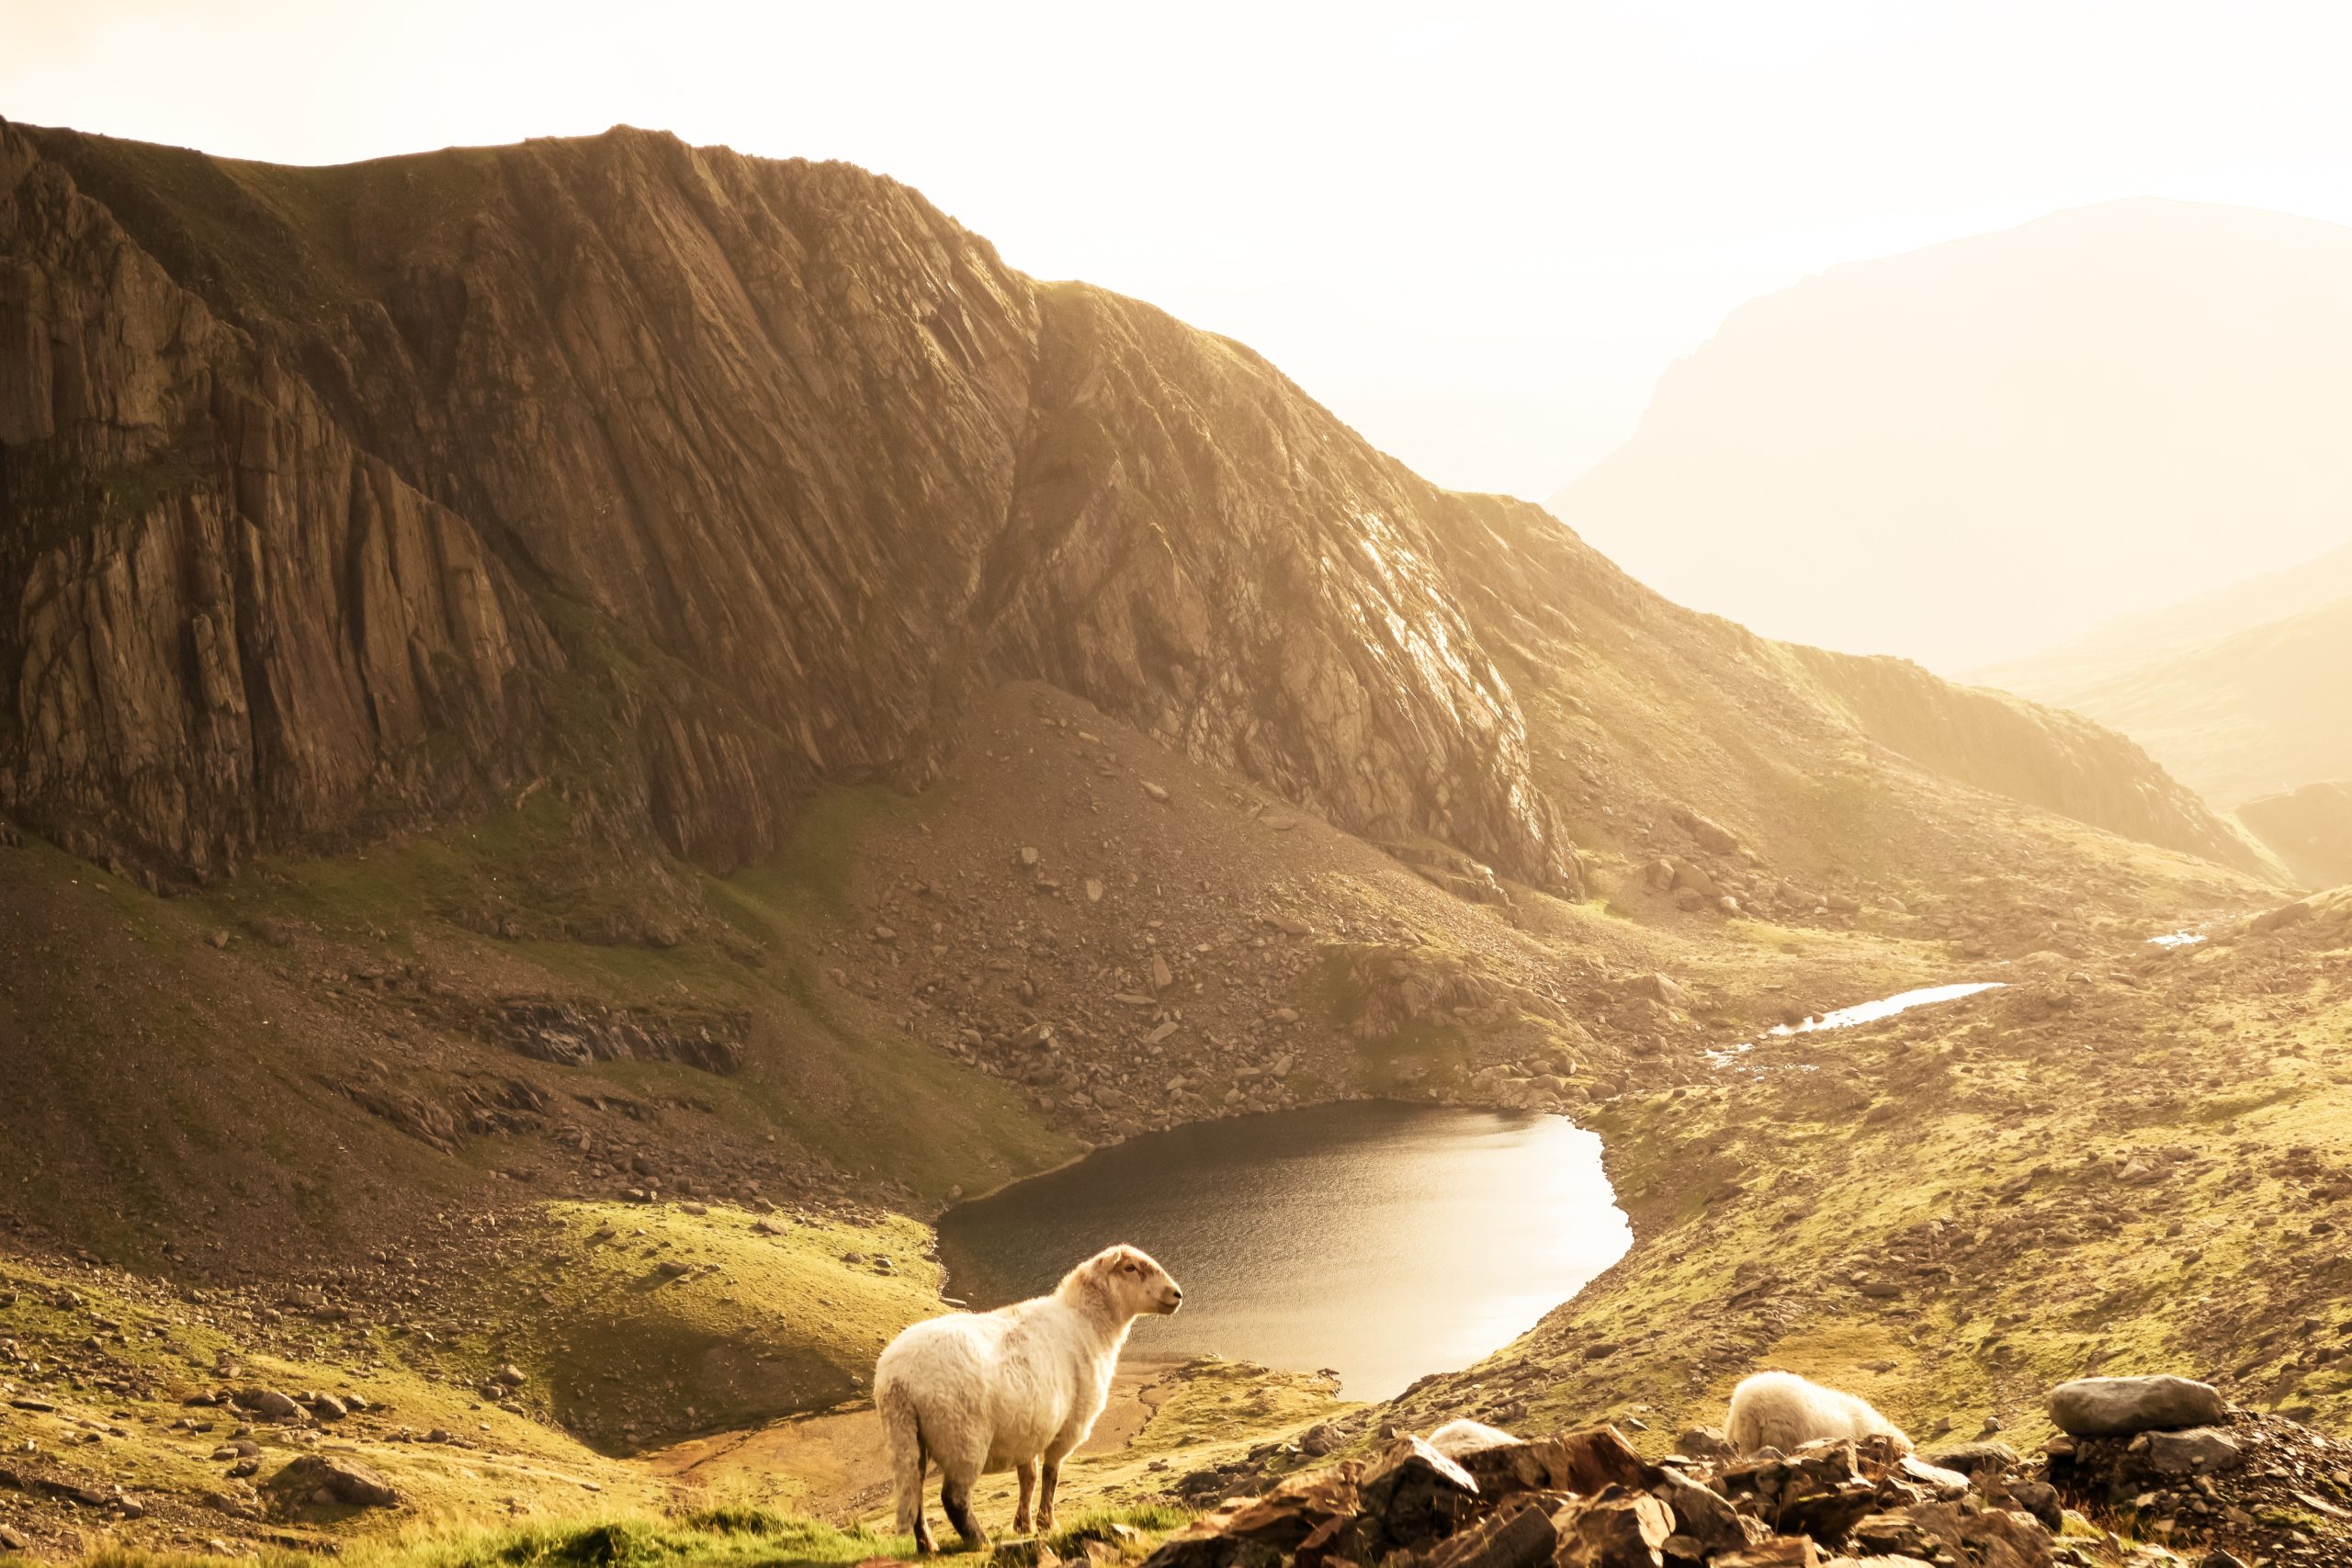 Photo of mountains, lake, & sheep in forground by Red Morley Hewitt on Unsplash